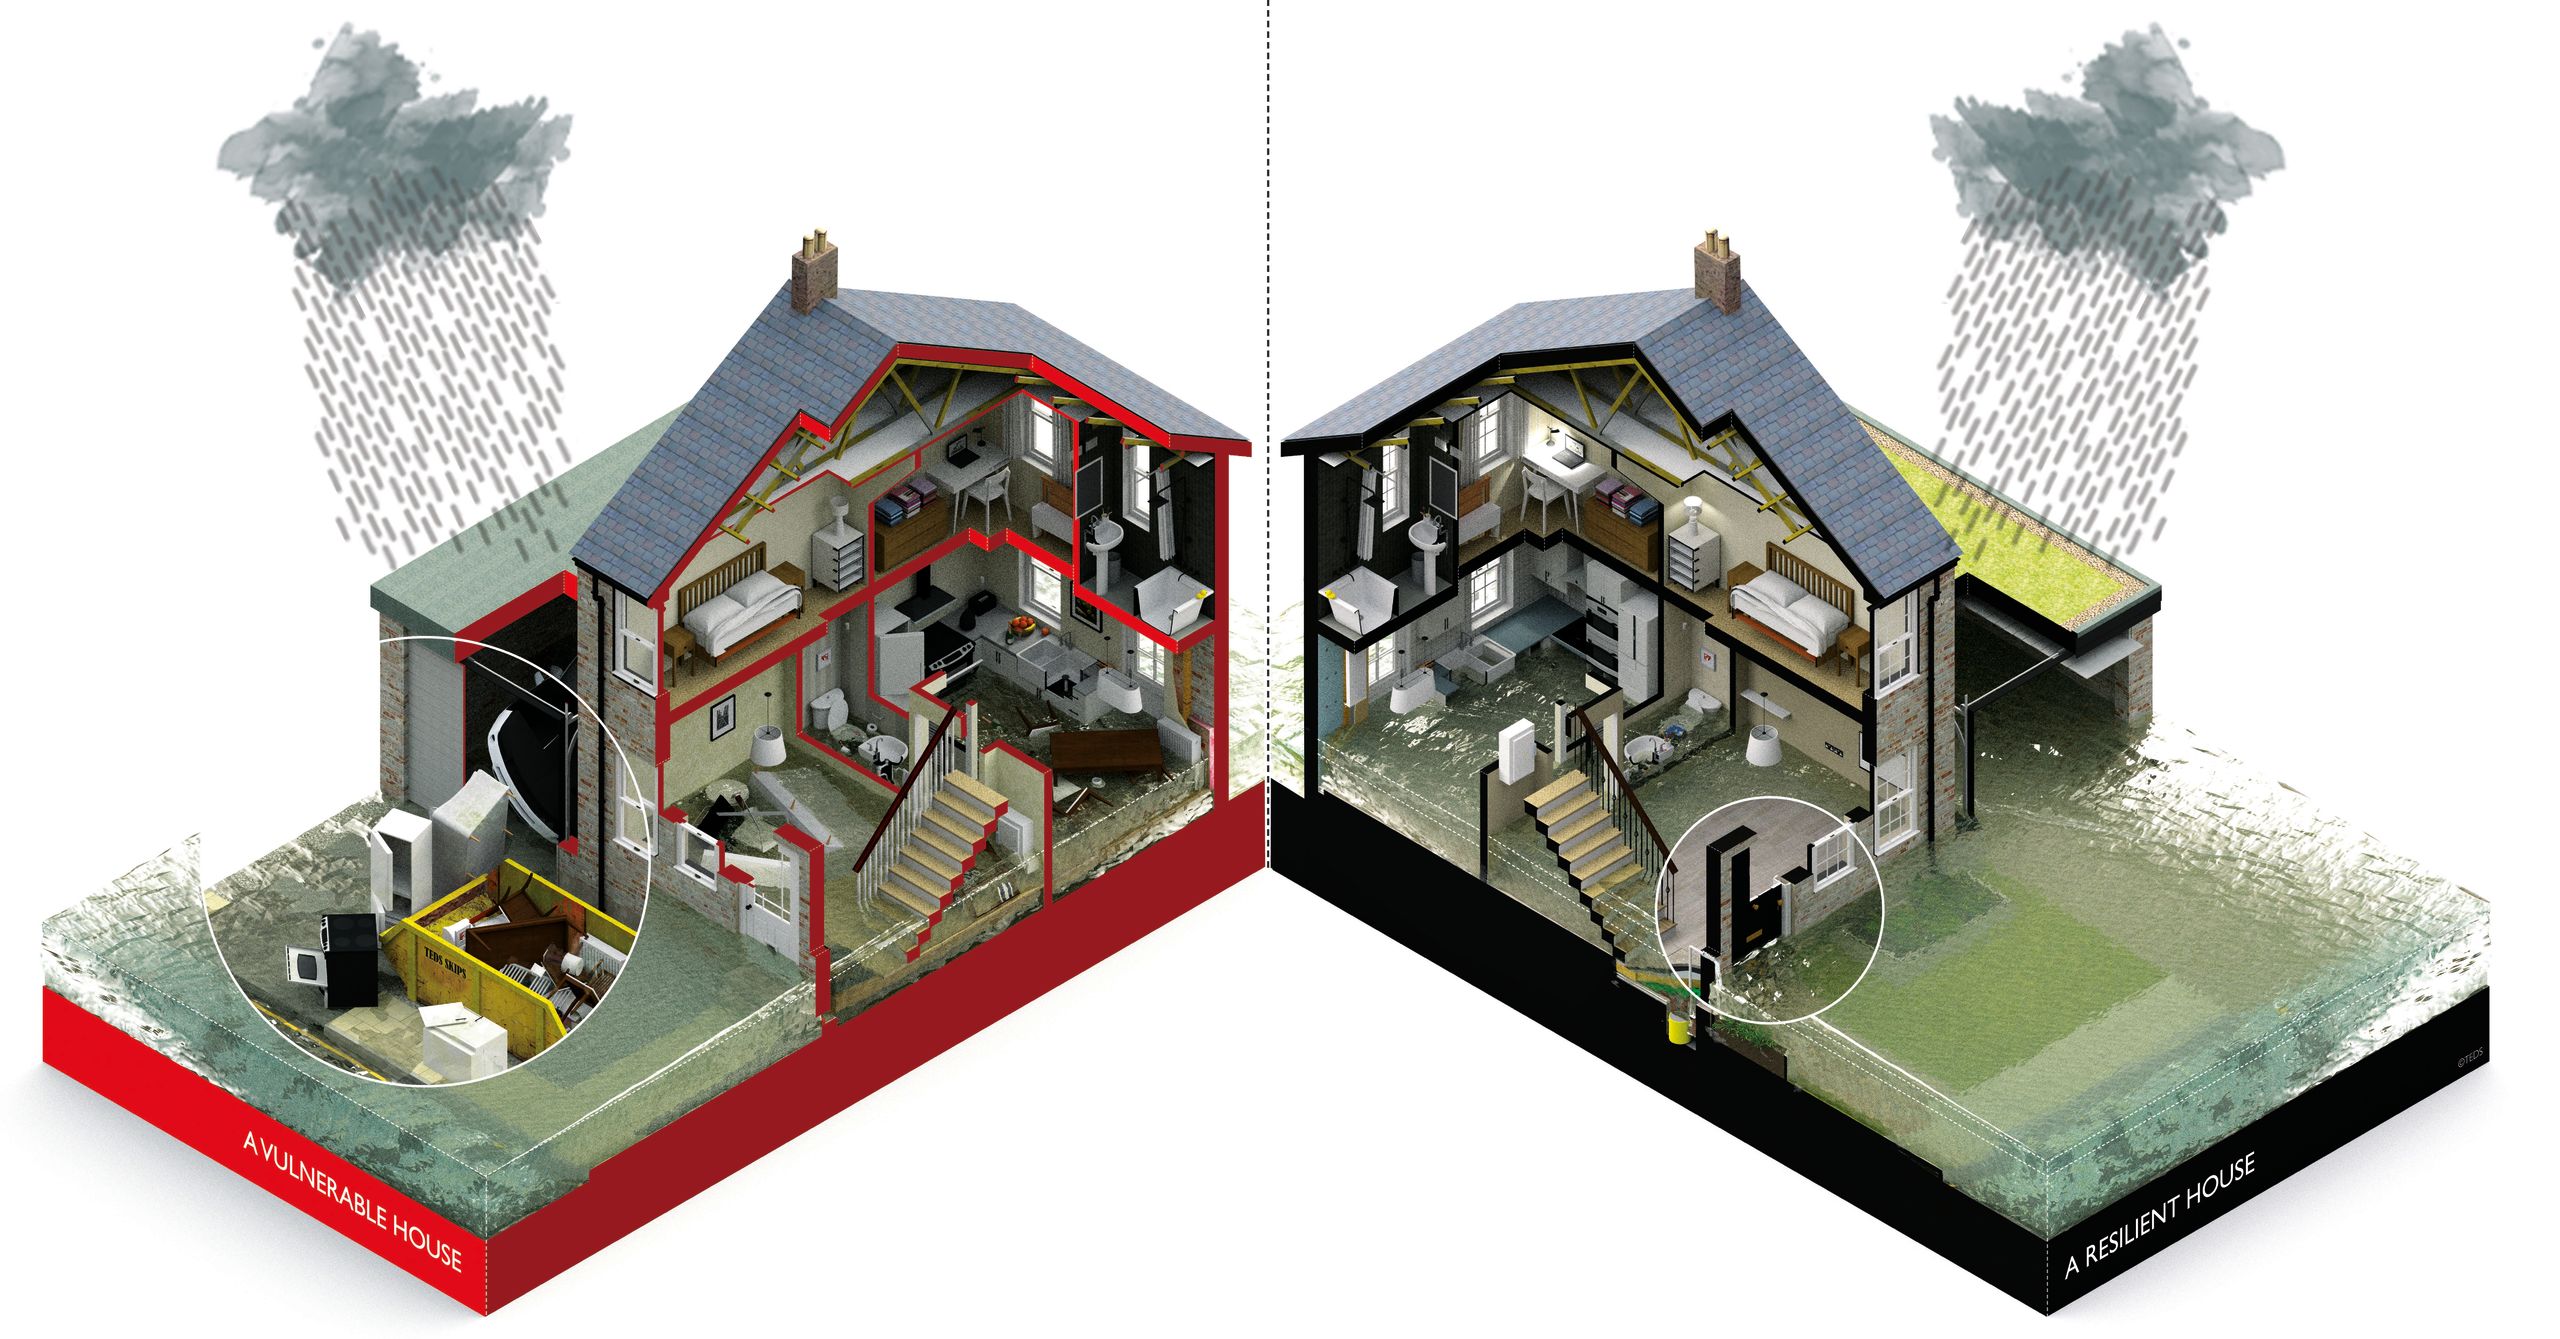 The impacts of flooding on a vulnerable and resilient house, featured in Retrofitting for Flood Resilience. Left: A vulnerable house. Right: A resilient house. © Edward Barsley / The Environmental Design Studio